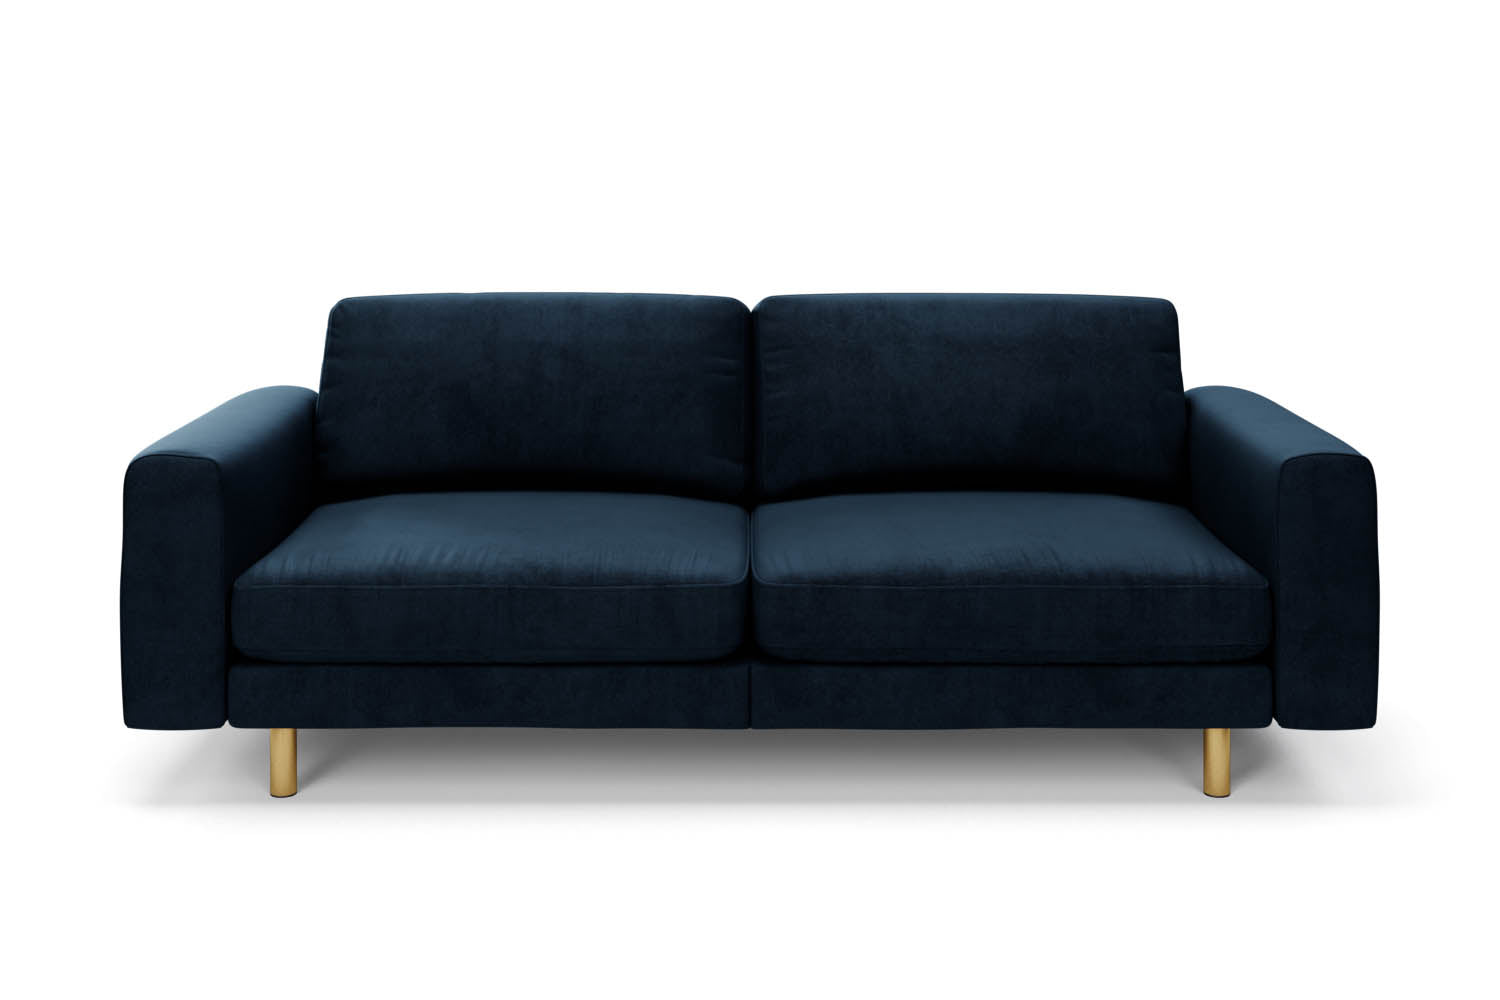 SNUG | The Big Chill 3 Seater Sofa in Deep Blue variant_40837174558768